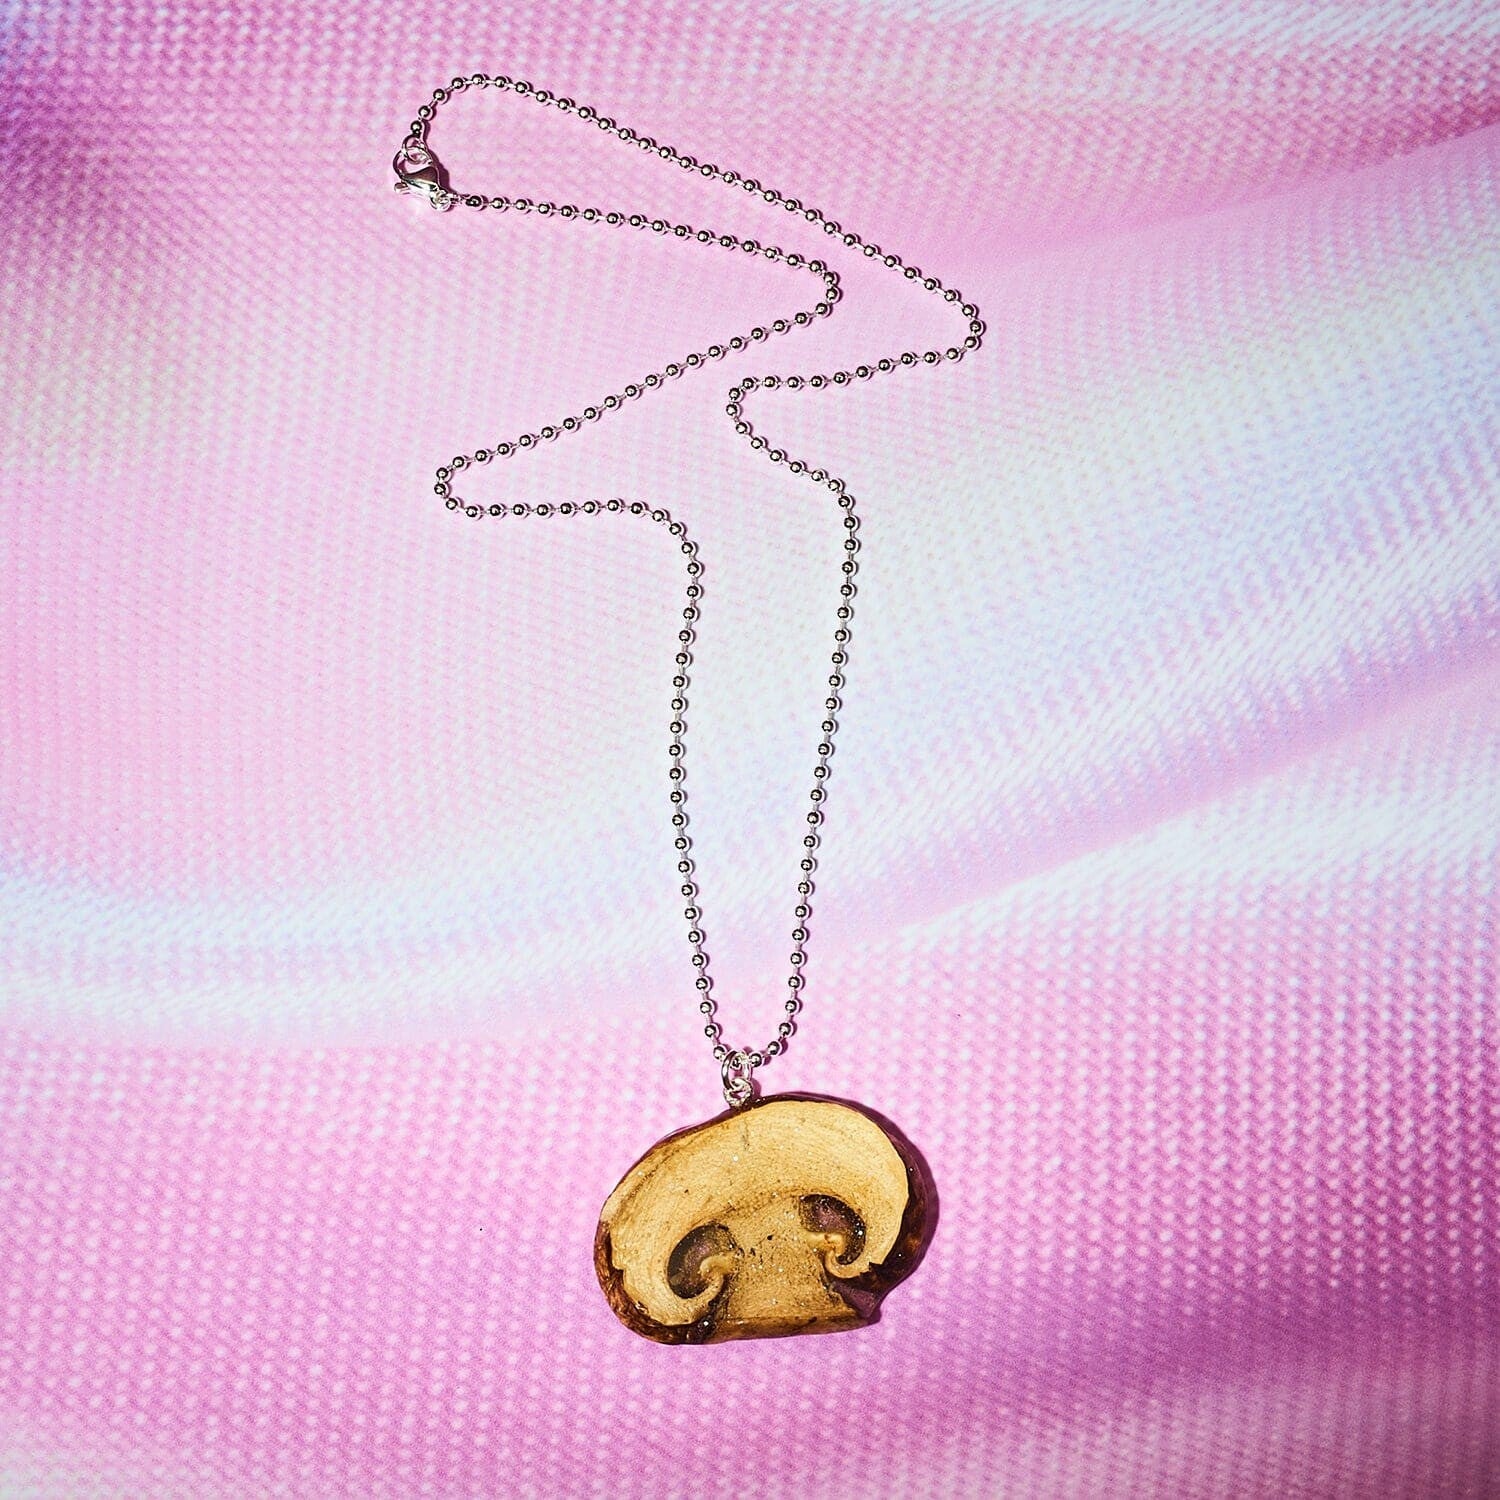 Mushroom Pendant Necklace Fake Food - Hand Made - In